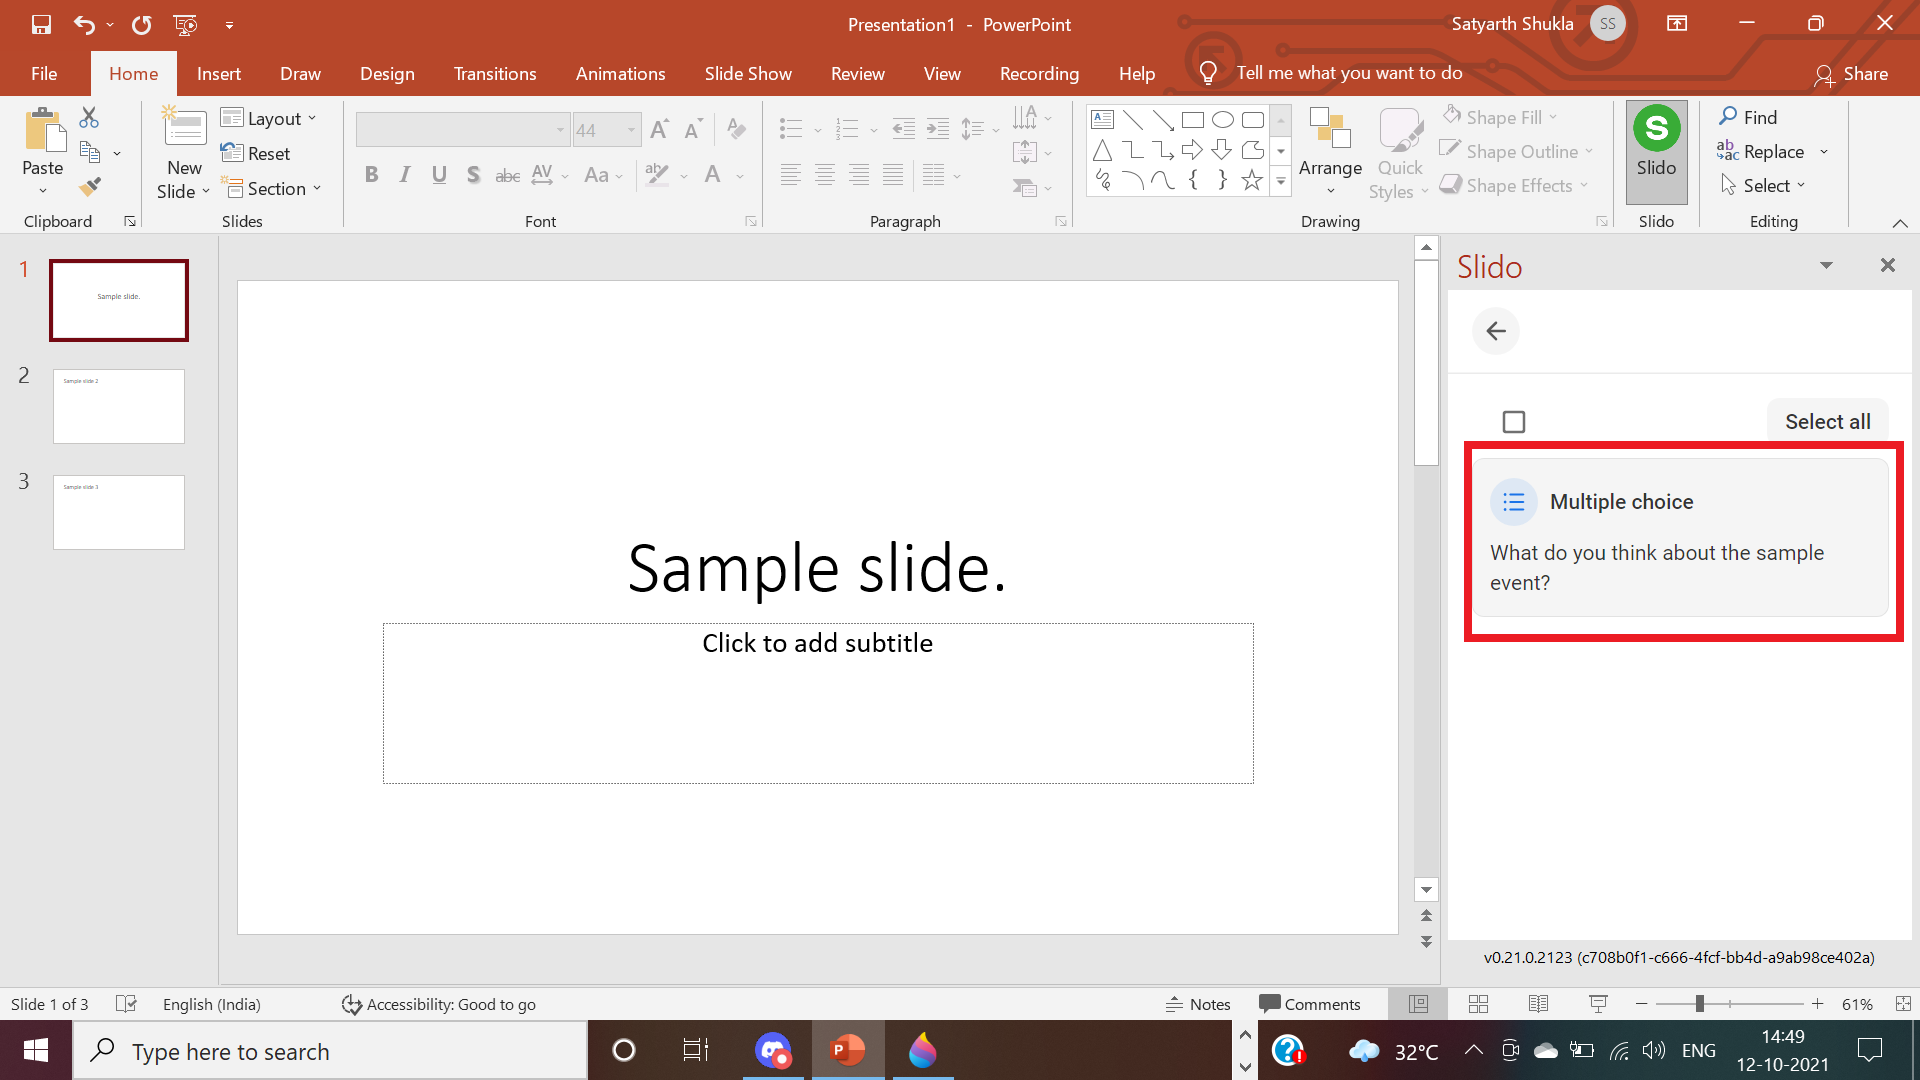 Adding a poll in Slido PowerPoint